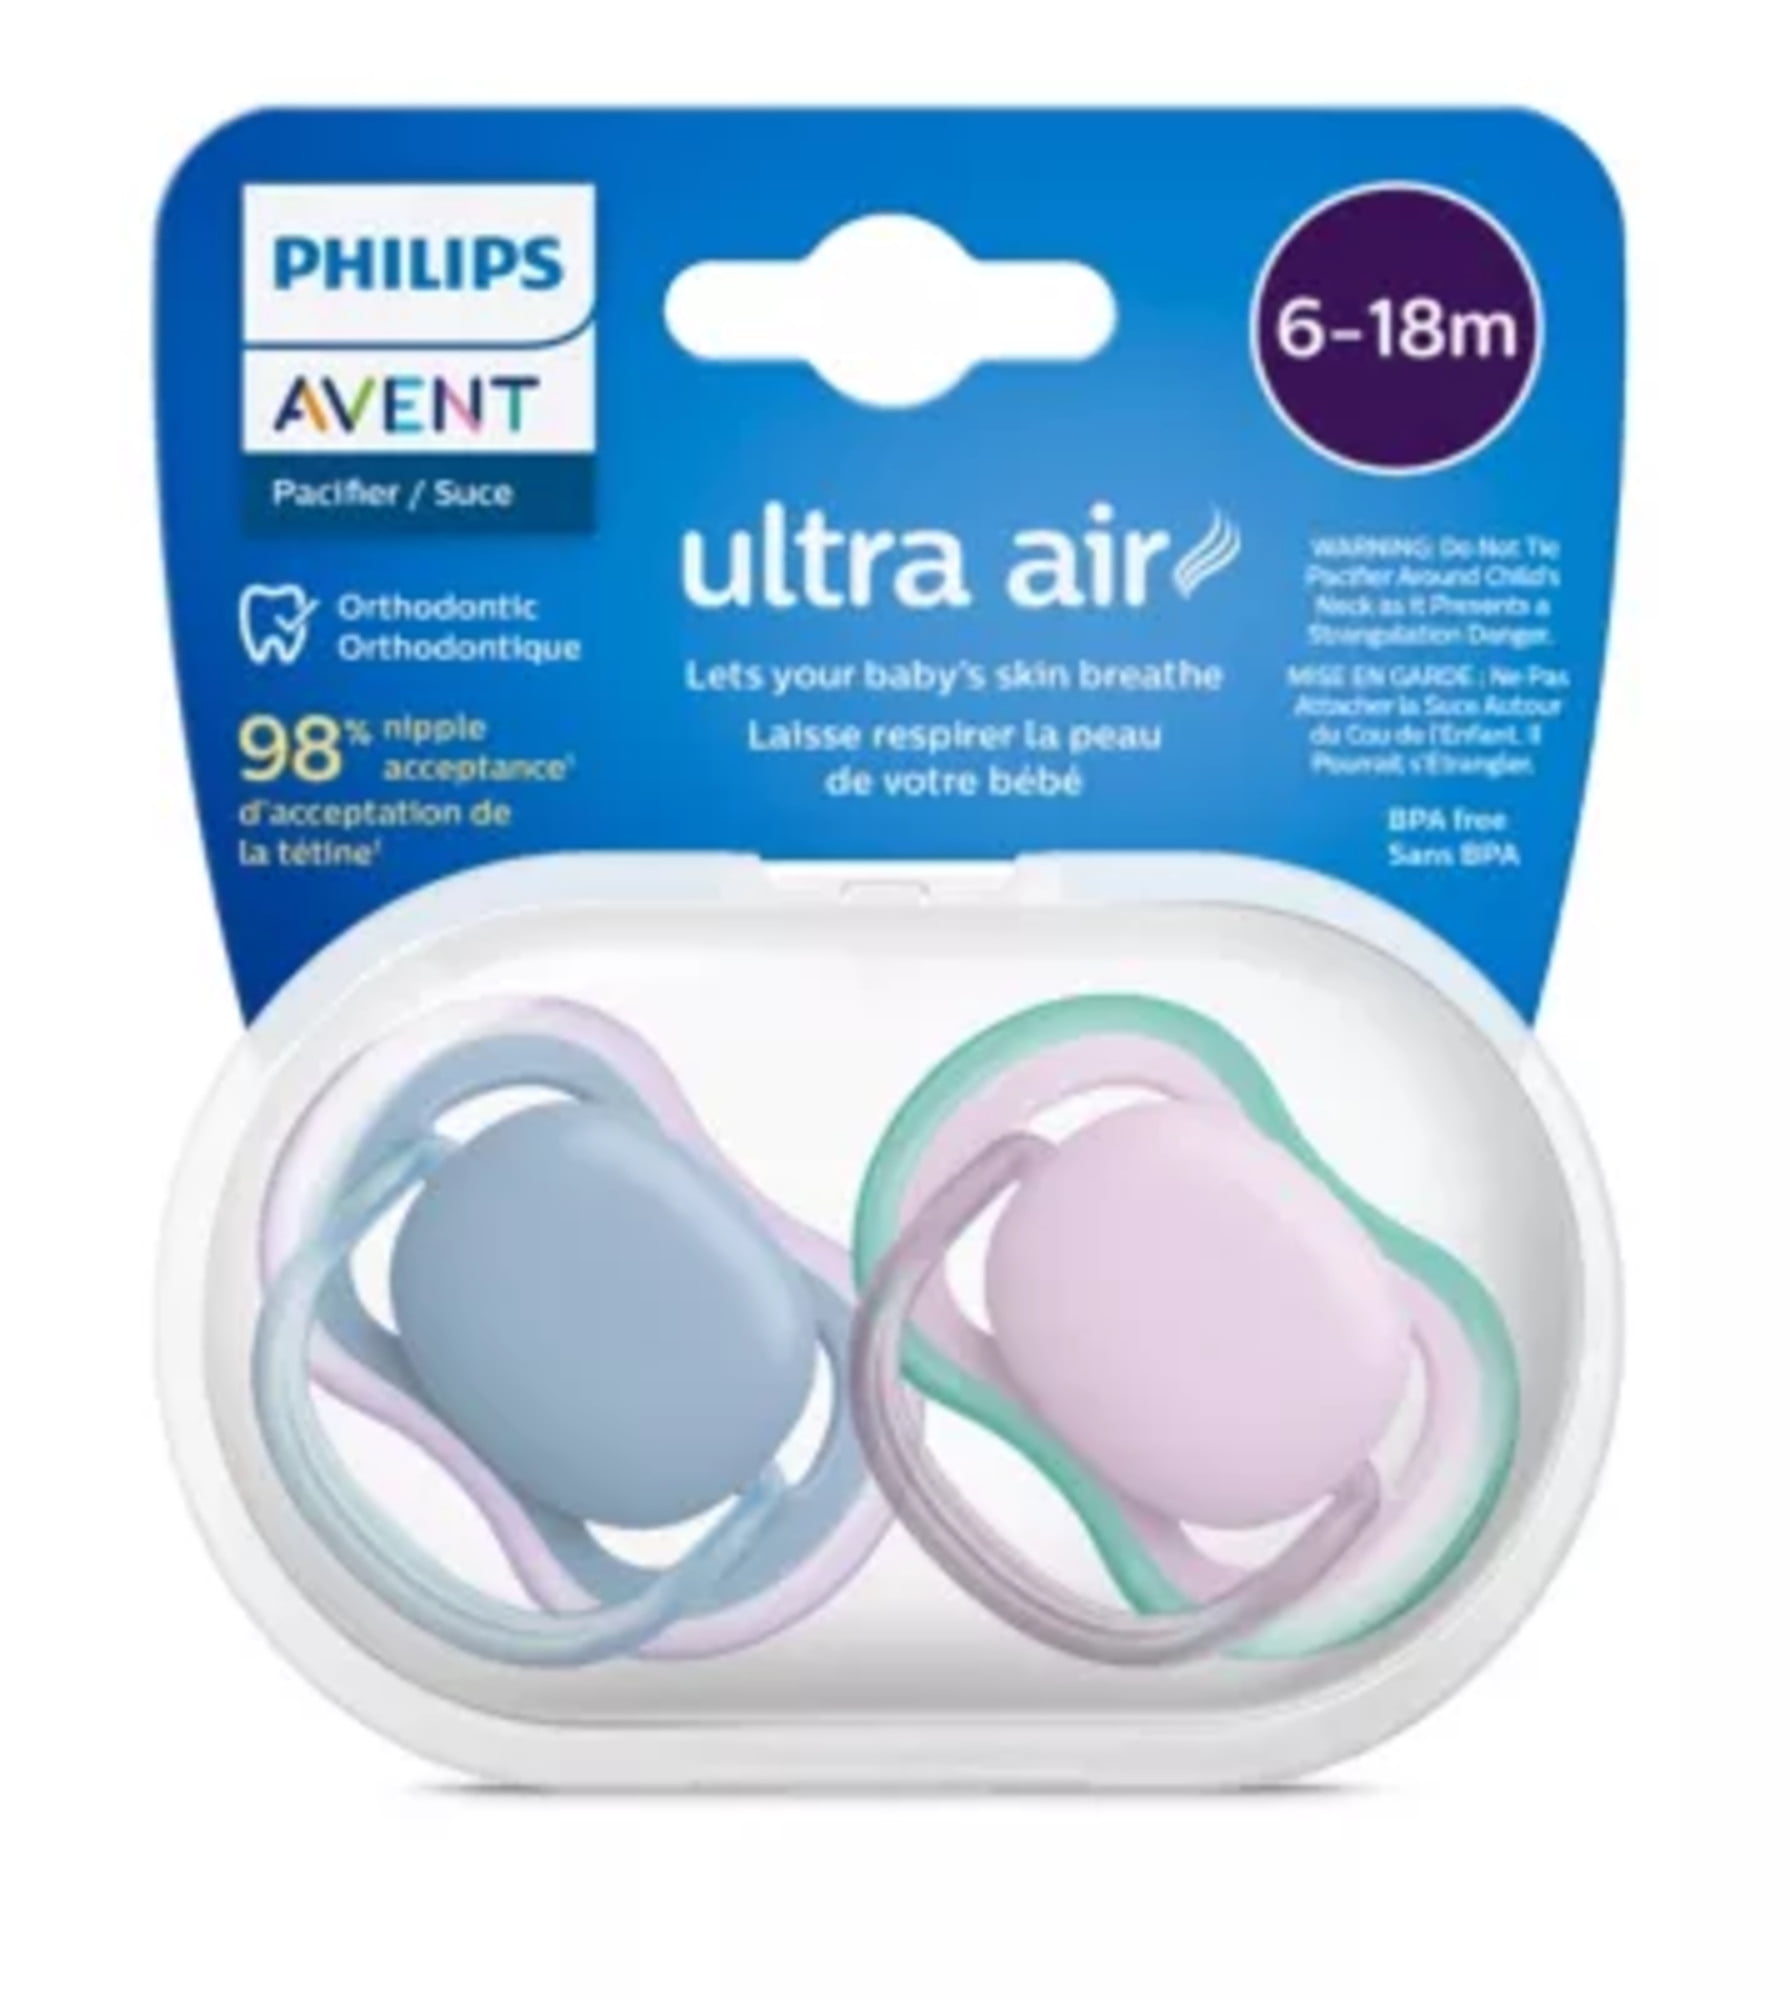 Philips Avent Chupete Ultra Air 6-18Meses Neutro 2uds